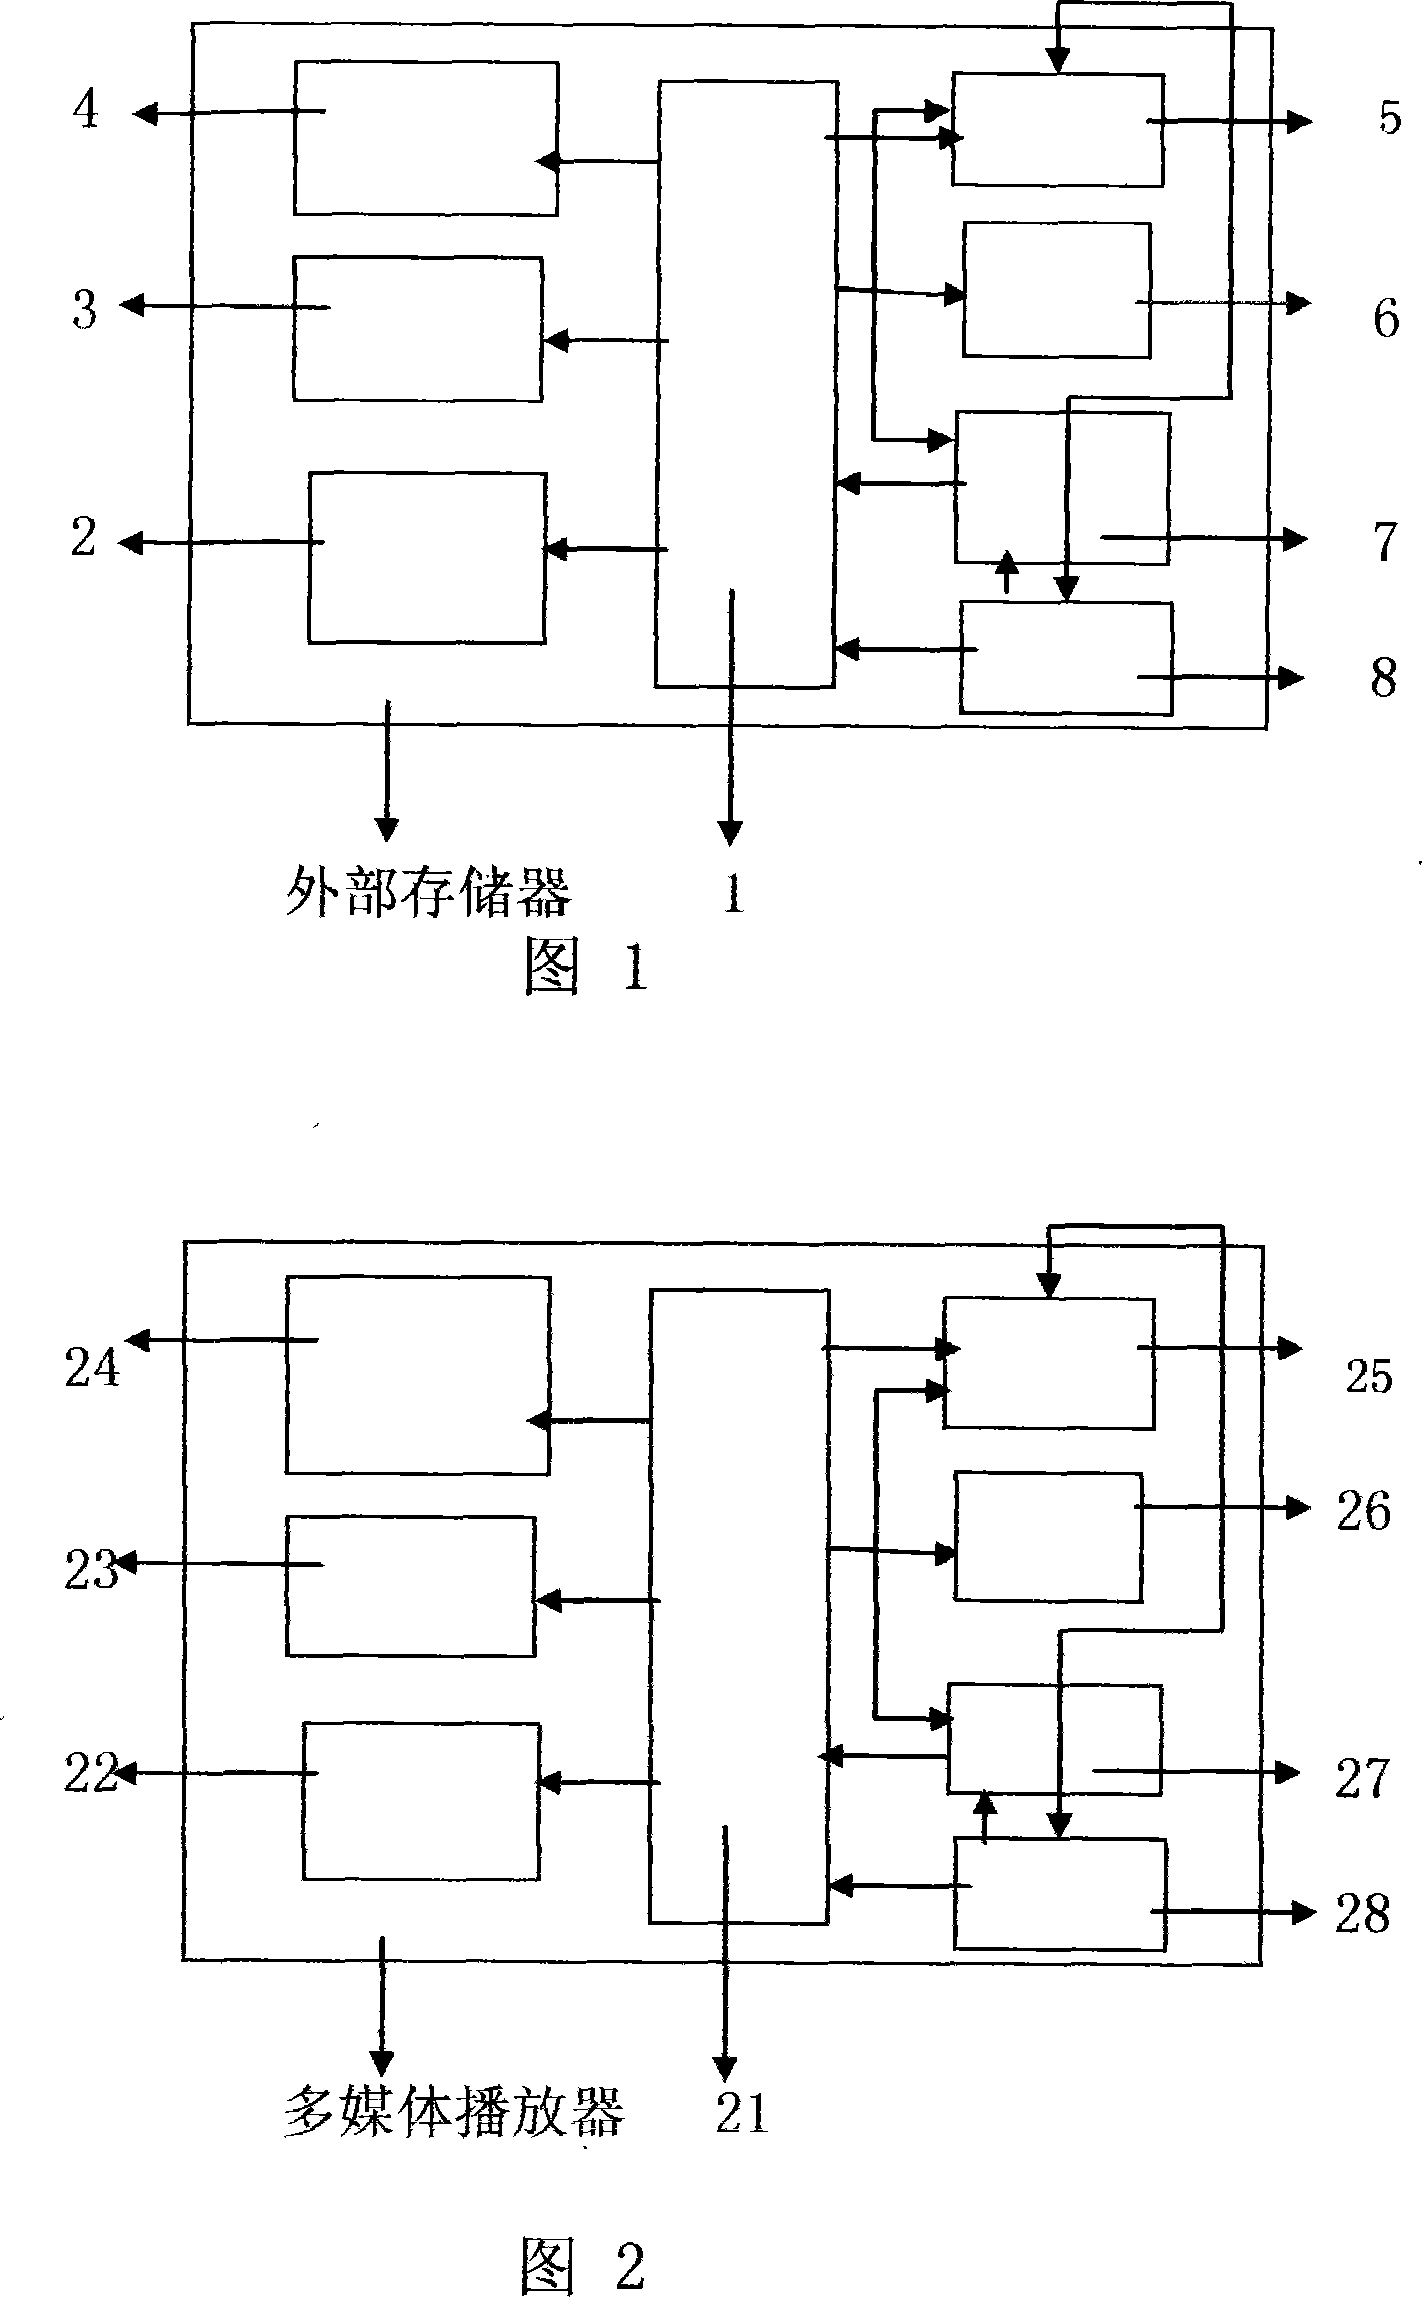 Atom power supply system for evaporable storing device